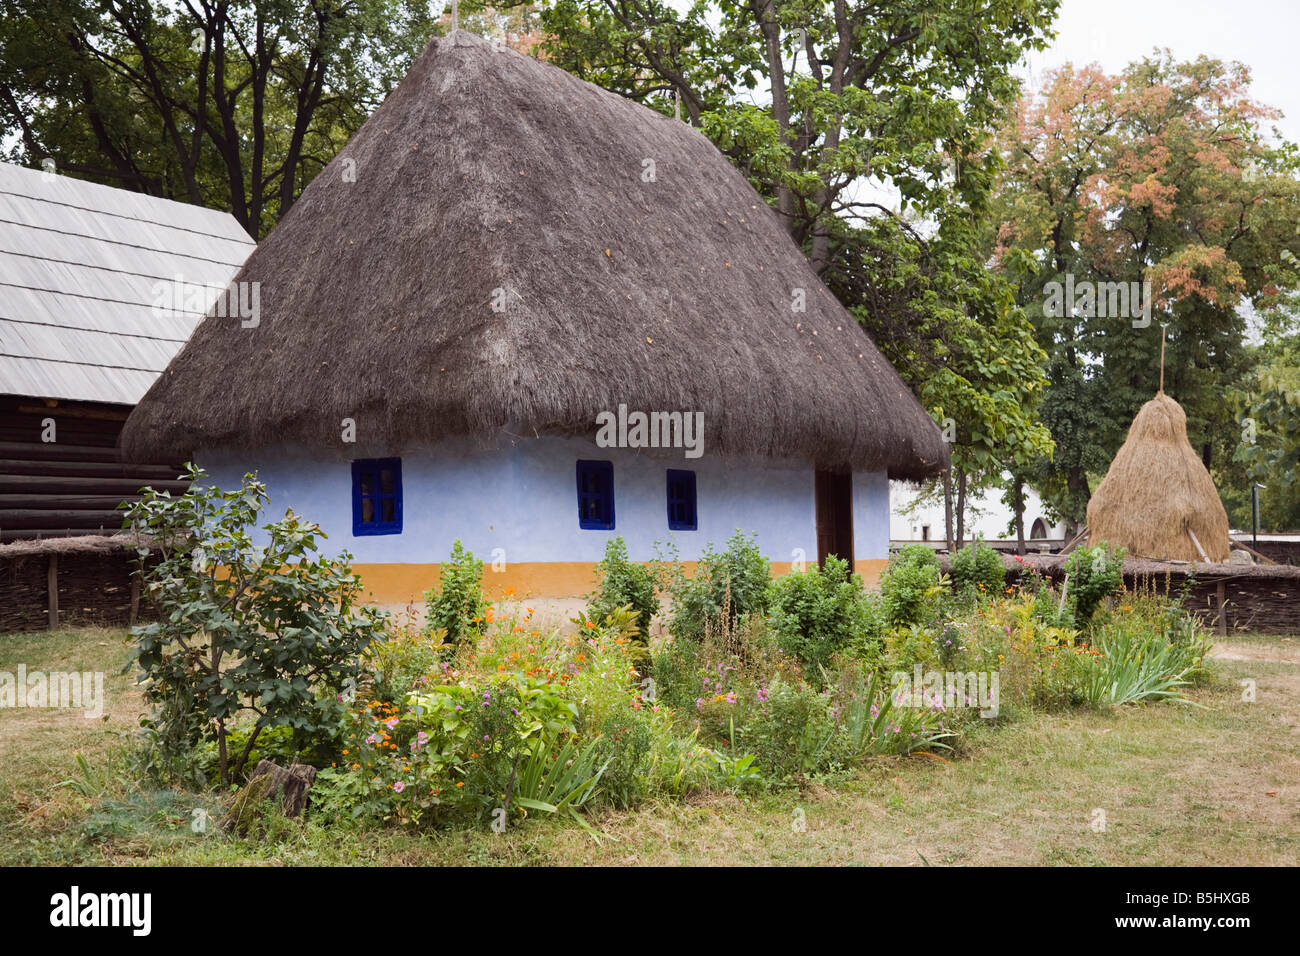 19th century Transylvanian thatched peasant house in outdoor Village Museum Muzeul Satului in Herastrau Park. Bucharest Romania Stock Photo